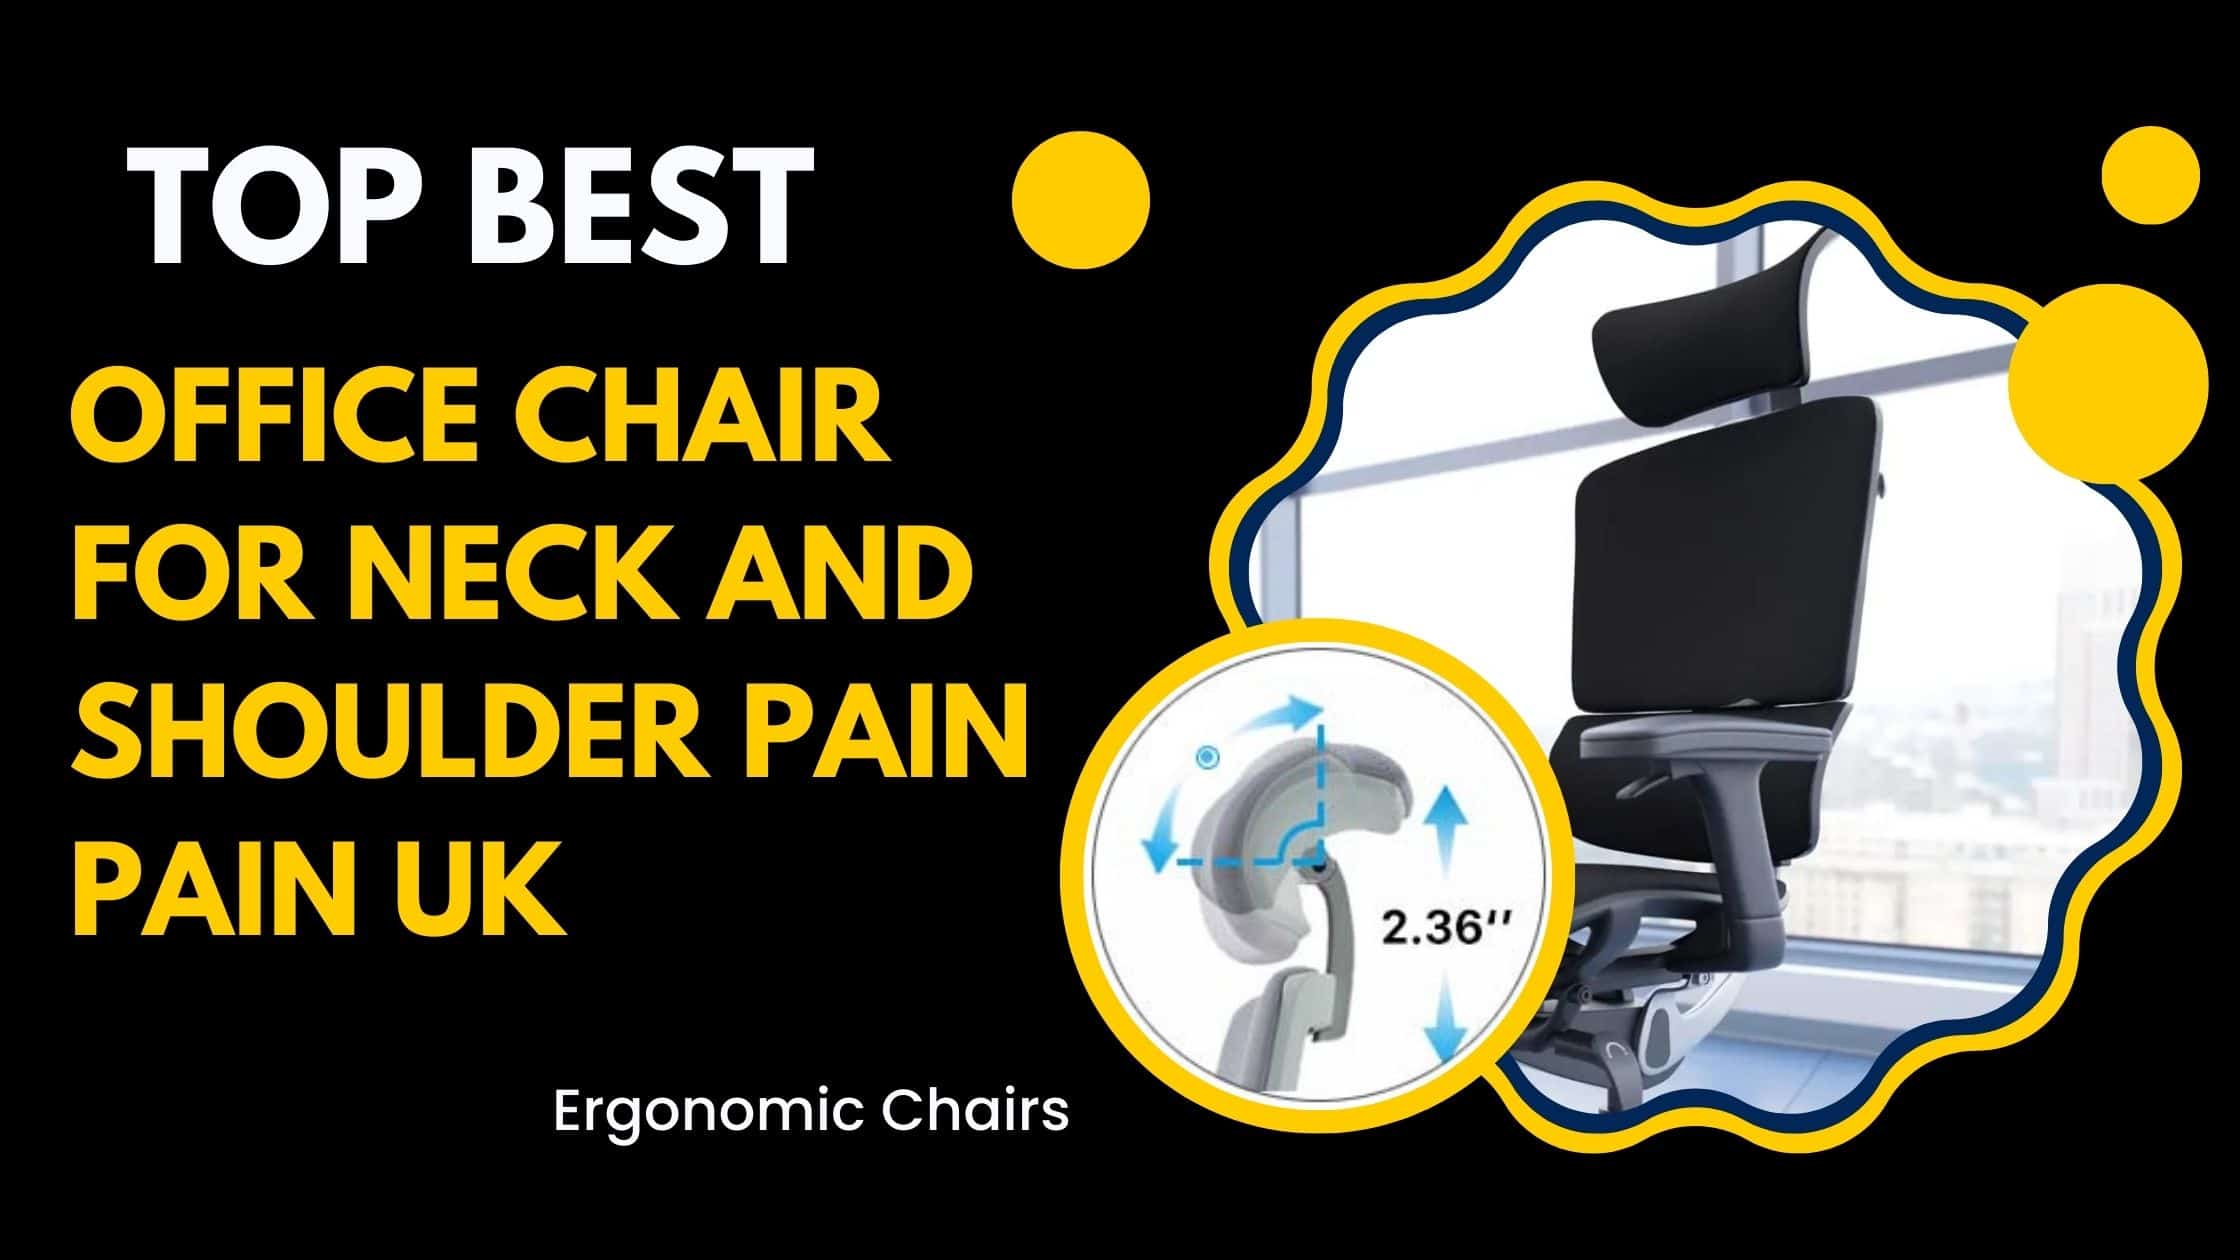 5 Tips for Choosing The Best Chair for Neck And Shoulder Pain